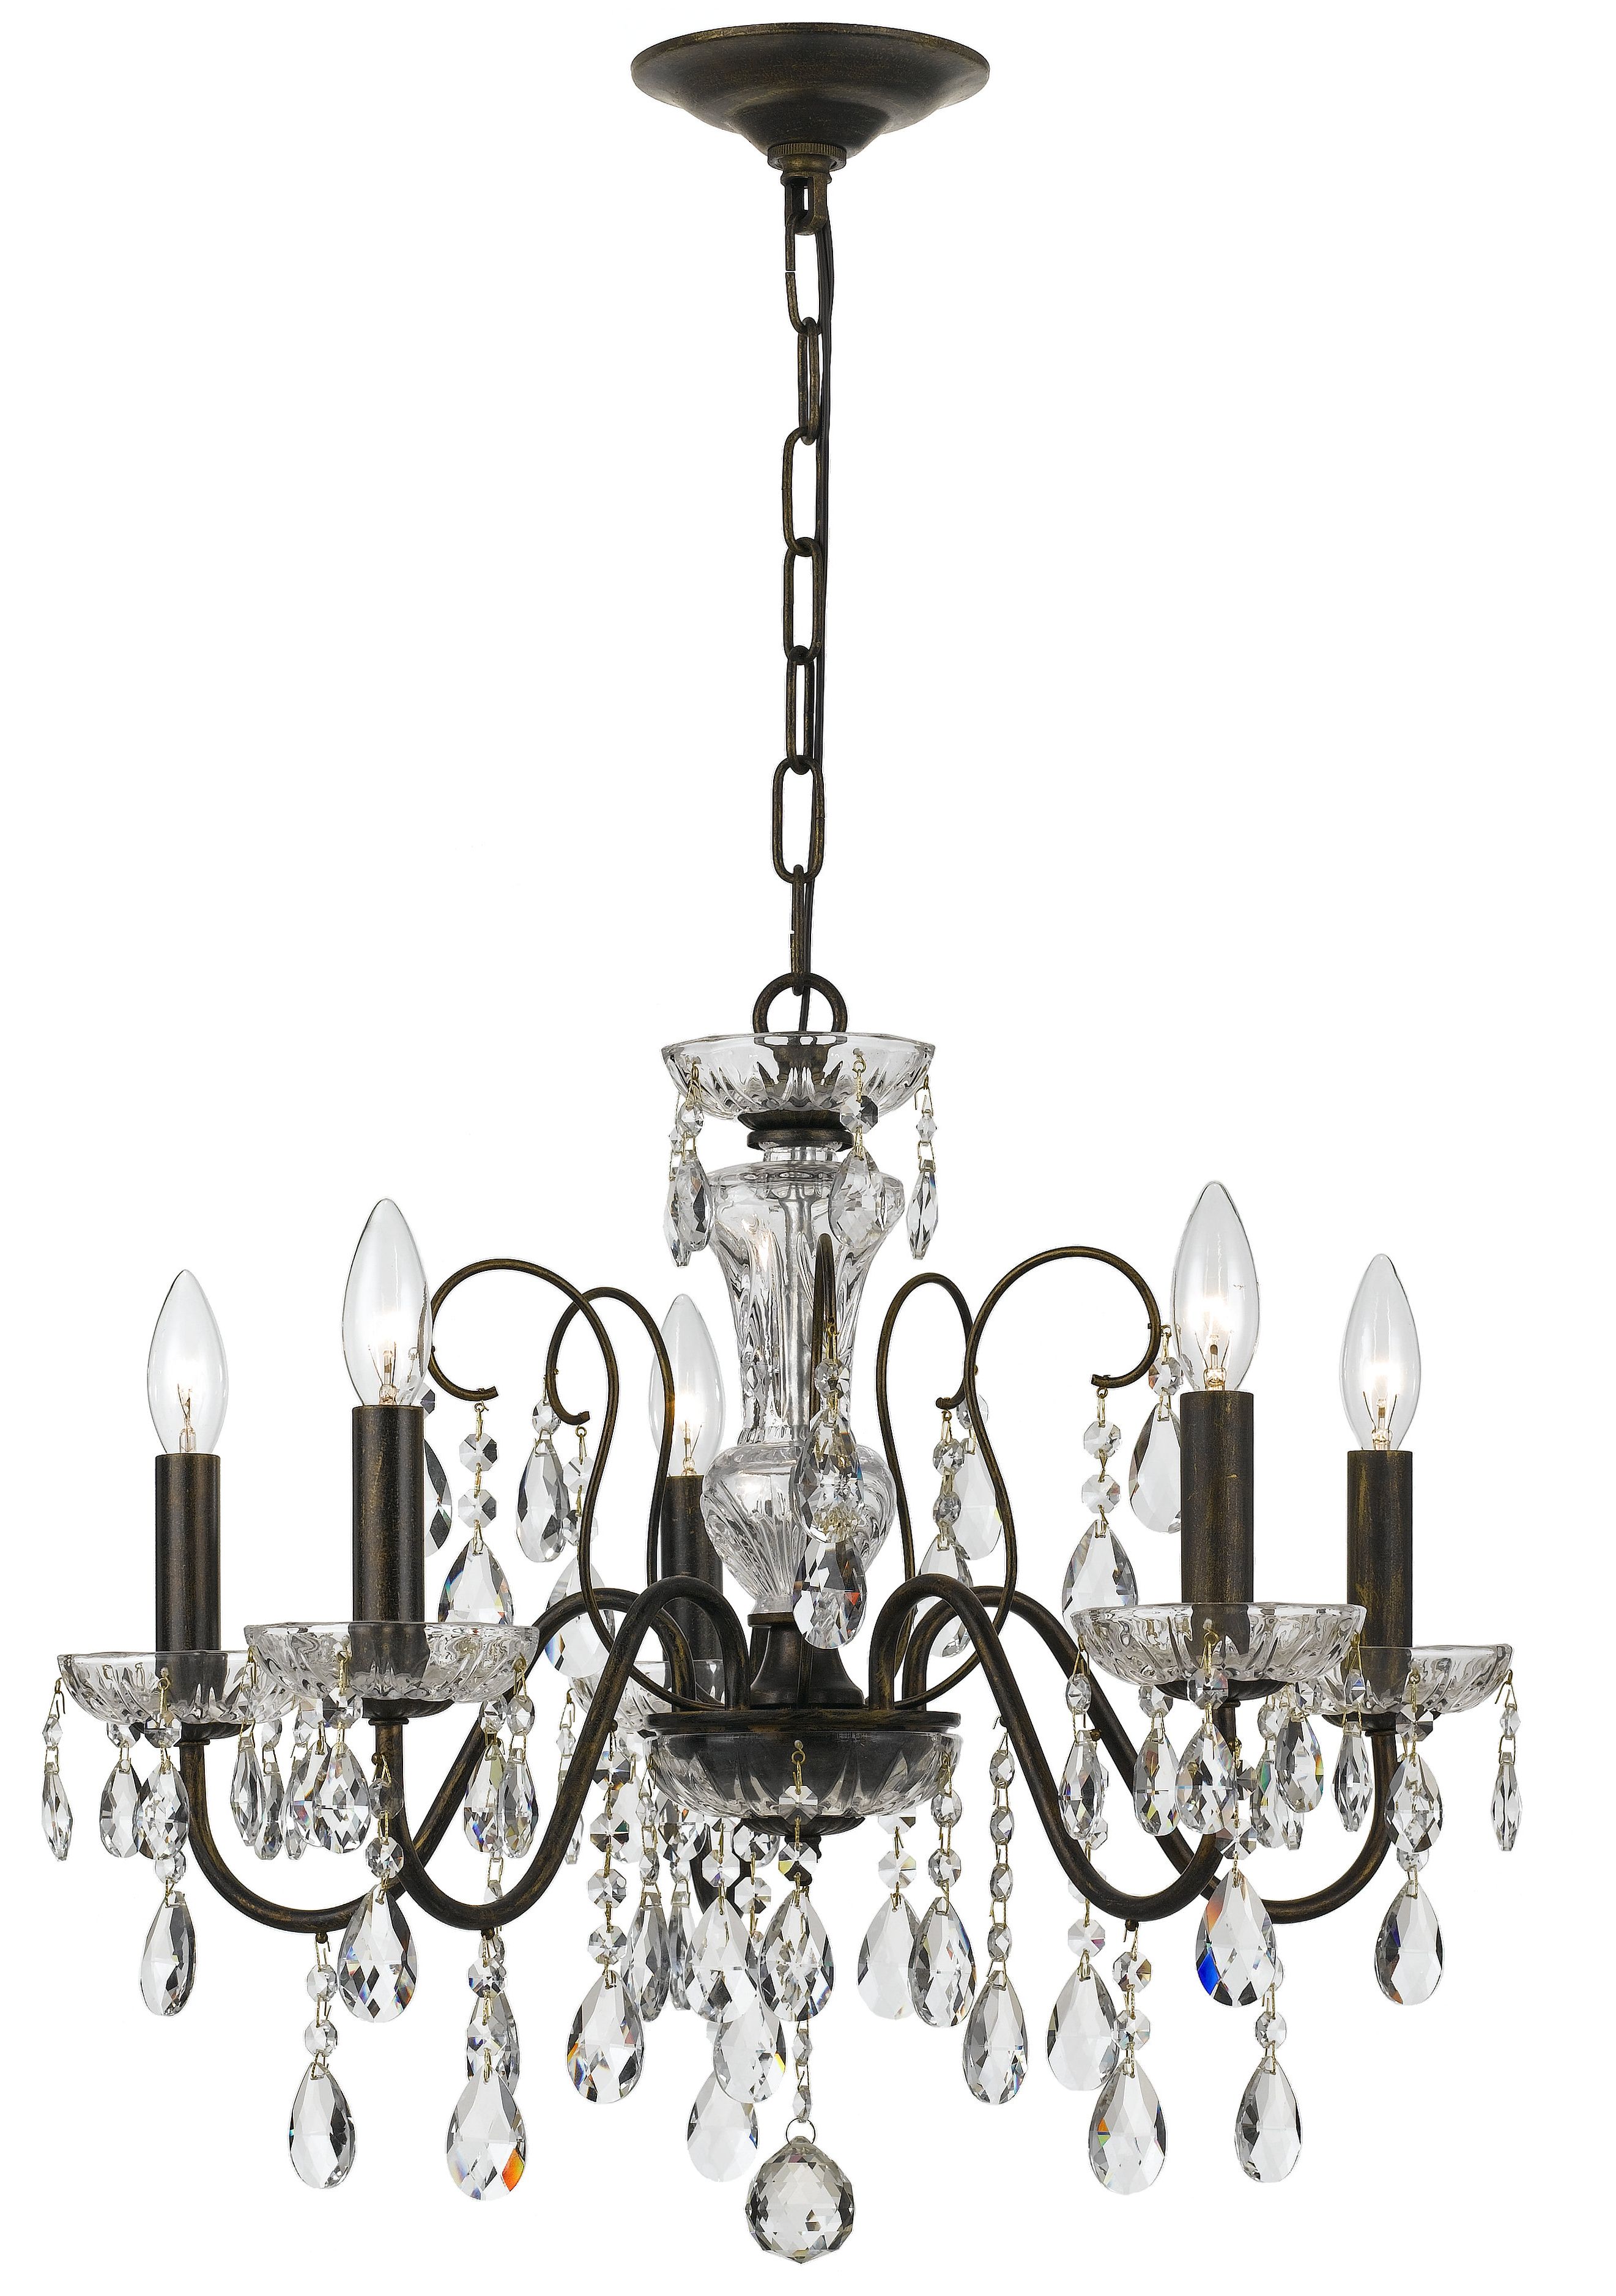 Trendy Roney 5 Light Candle Style Chandelier Pertaining To Watford 6 Light Candle Style Chandeliers (View 22 of 25)